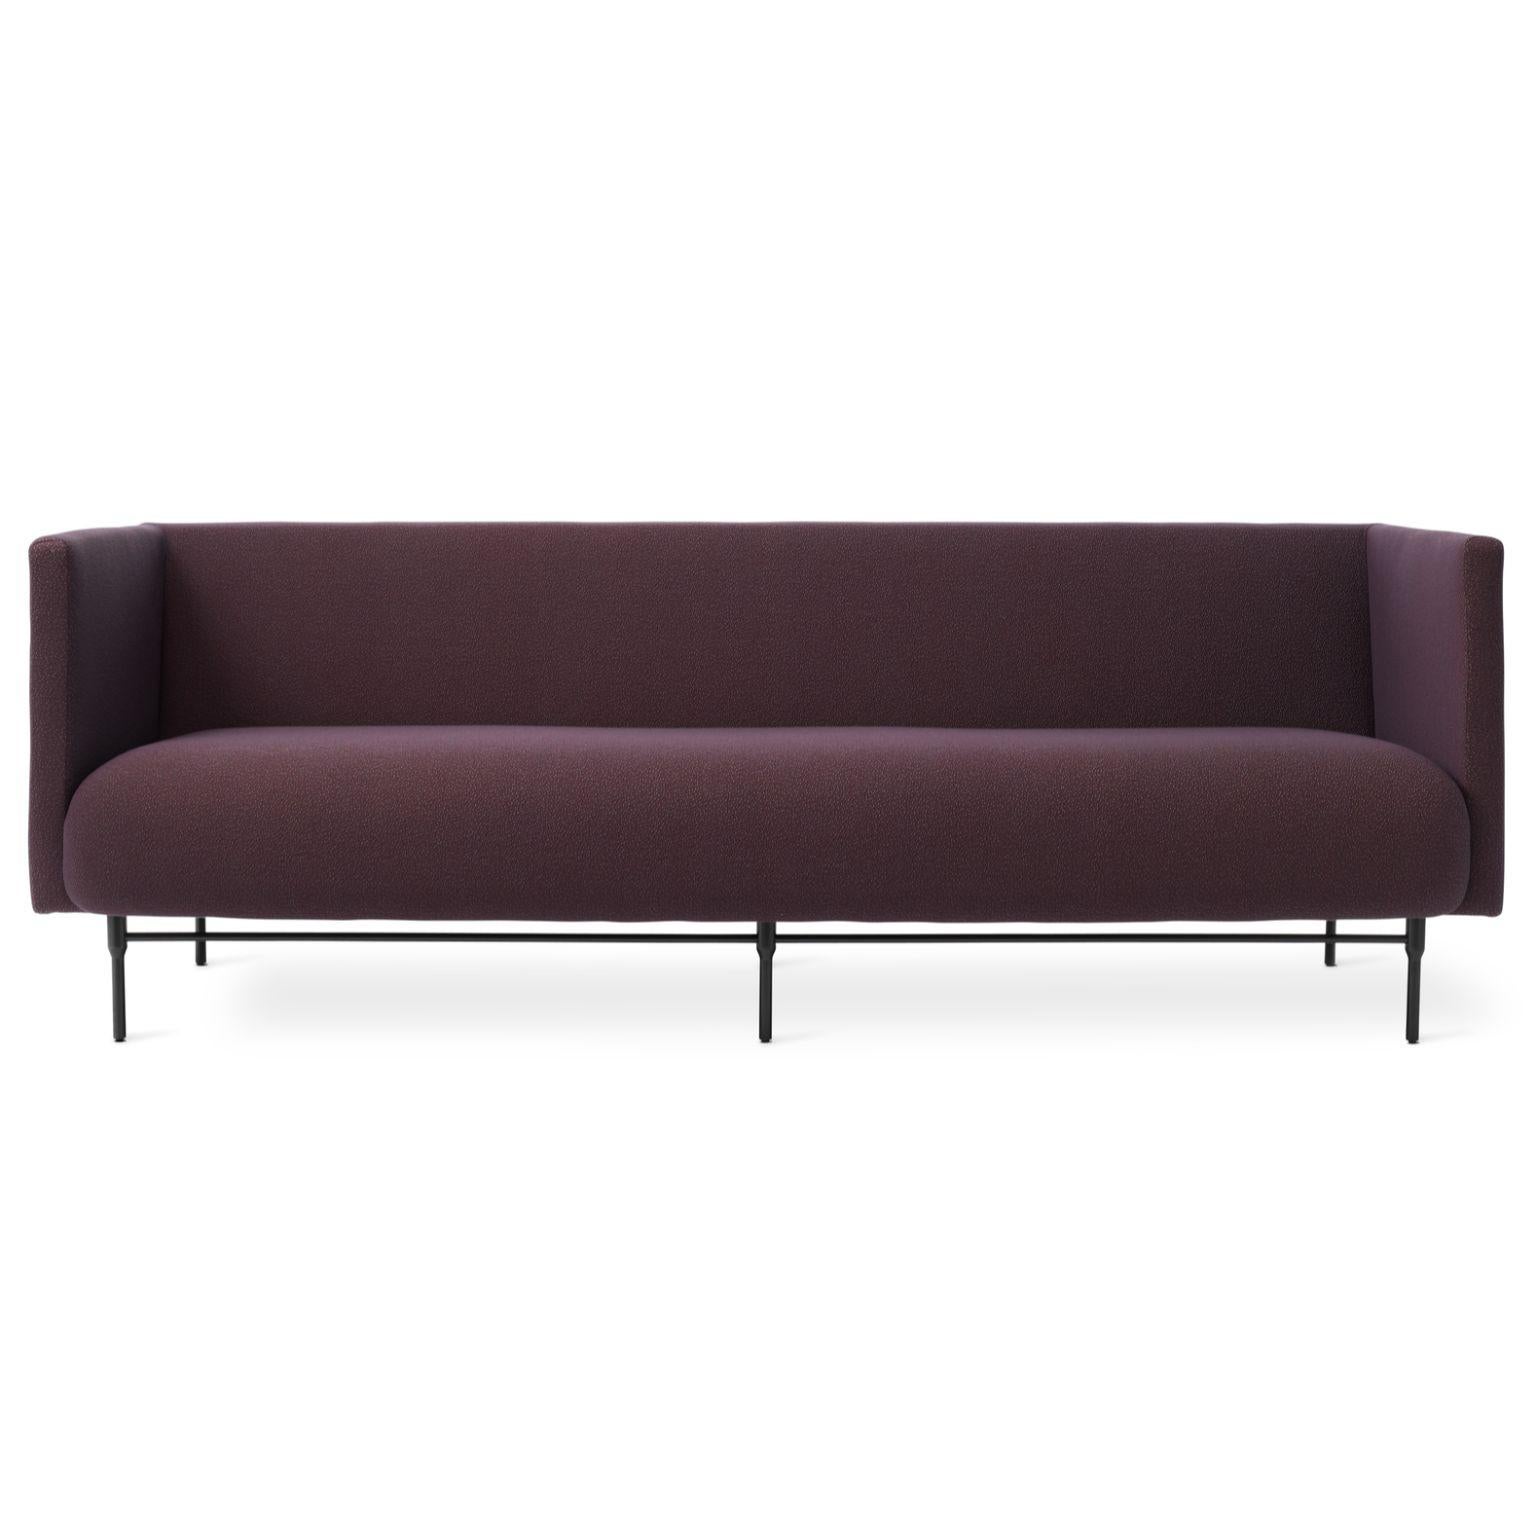 Galore 3 seater sprinkles eggplant by Warm Nordic
Dimensions: D222 x W83 x H 76 cm
Material: textile upholstery, powder coated black steel legs, wooden frame, foam, spring system.
Weight: 62 kg
Also available in different colours and finishes.